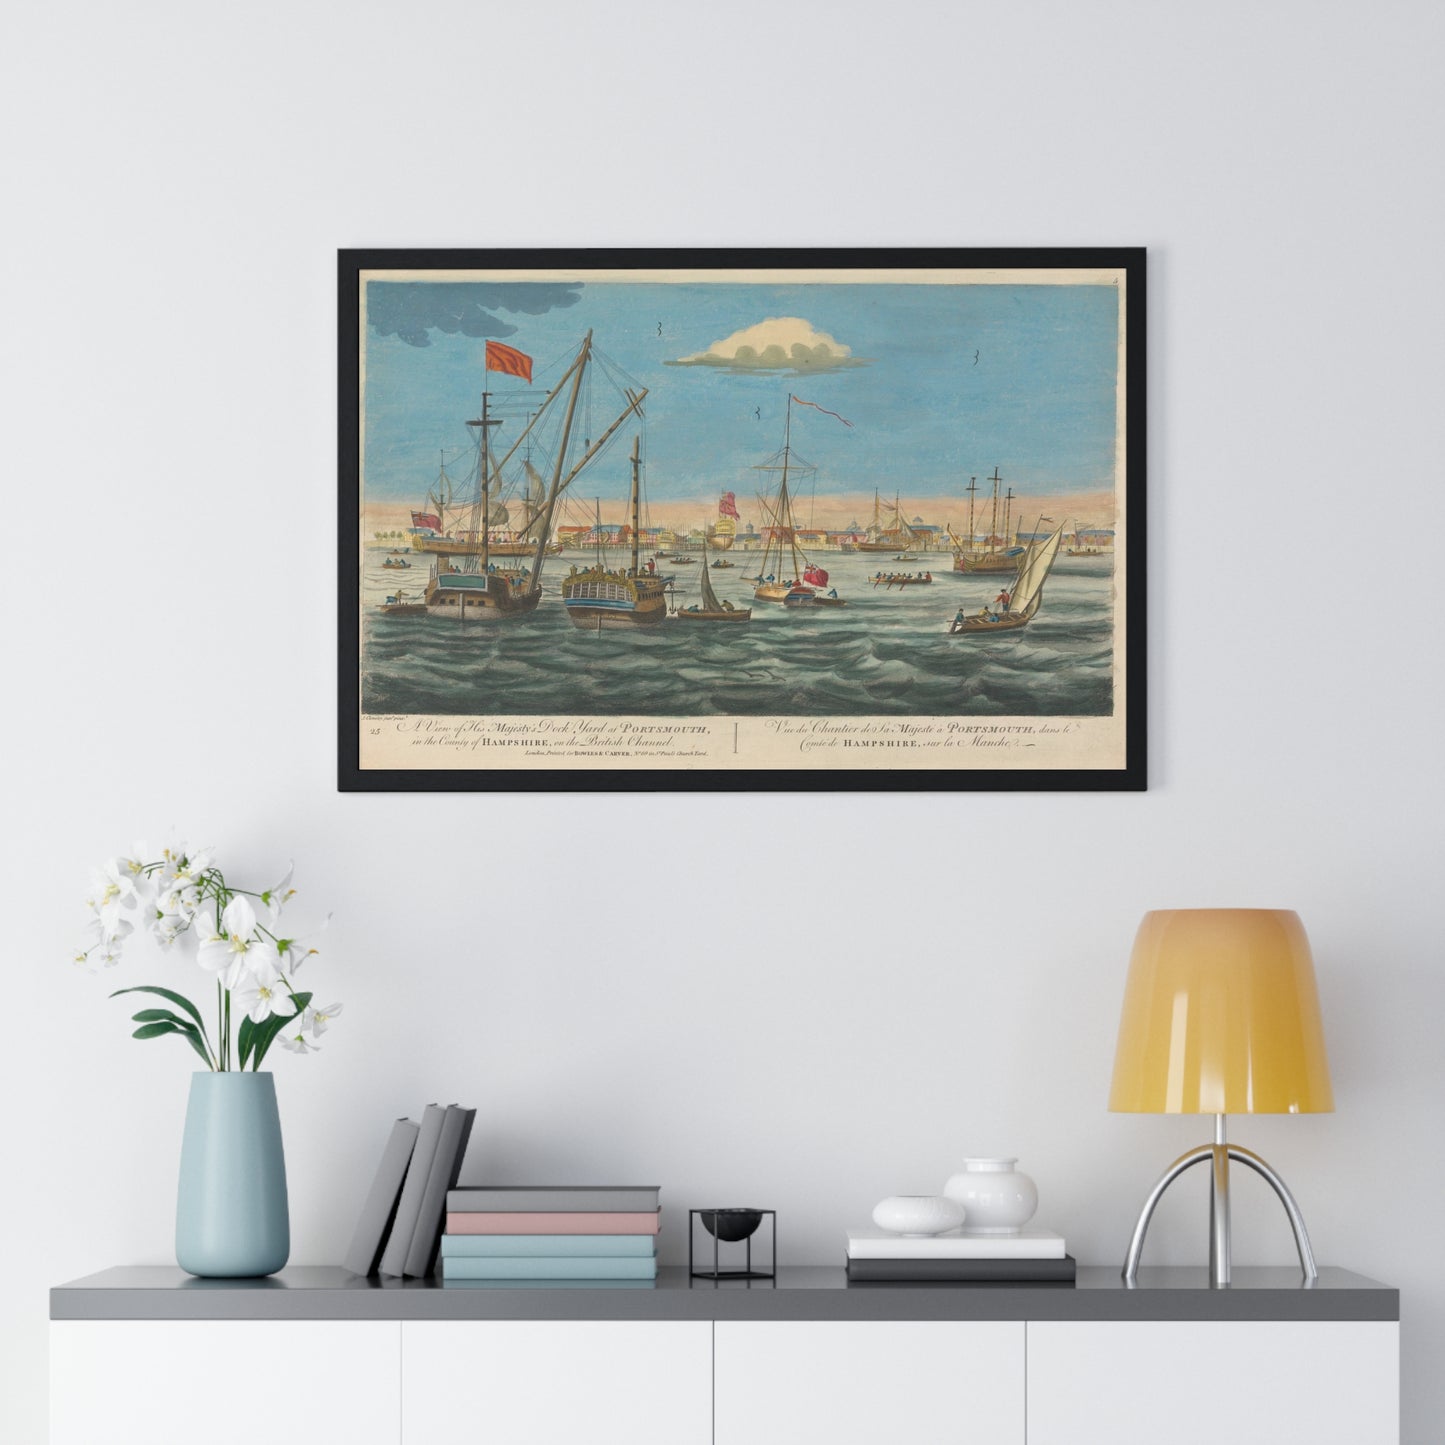 A View of His Majesty's Dock Yard at Portsmouth, in the County of Hampshire, on the British Channel from the Original, Framed Art Print